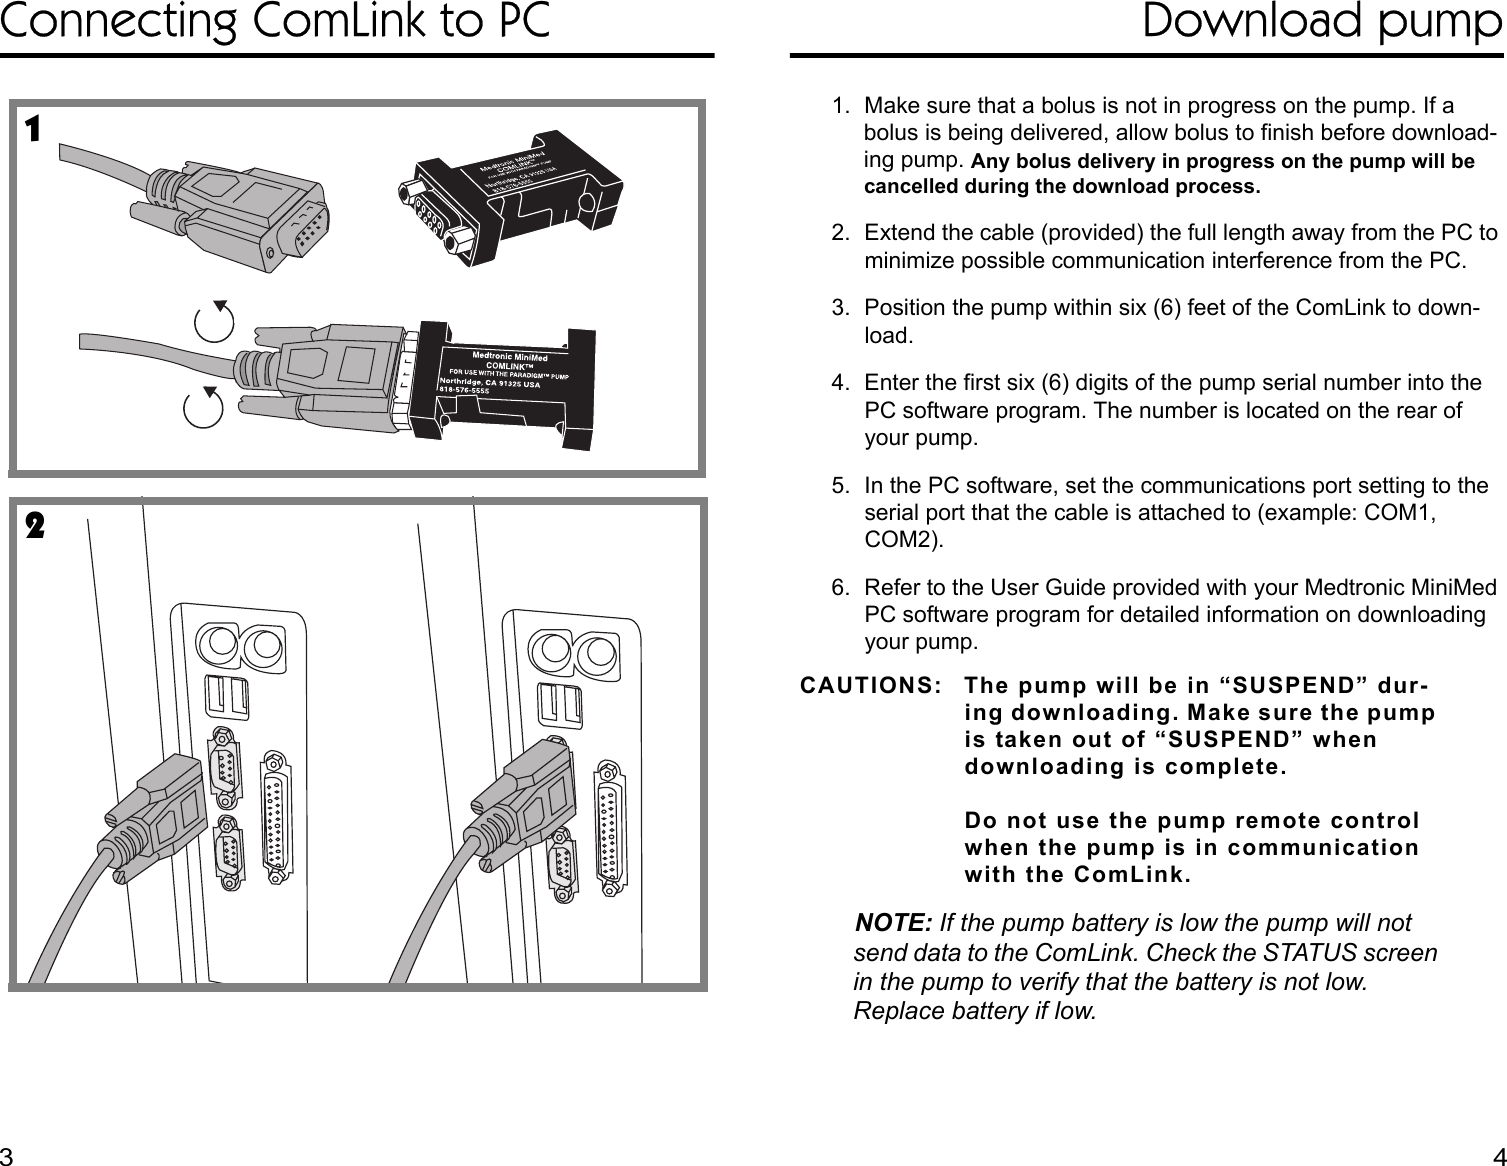 Connecting ComLink to PC Download pump1. Make sure that a bolus is not in progress on the pump. If a bolus is being delivered, allow bolus to finish before download-ing pump. Any bolus delivery in progress on the pump will be cancelled during the download process.2. Extend the cable (provided) the full length away from the PC to minimize possible communication interference from the PC.3. Position the pump within six (6) feet of the ComLink to down-load.4. Enter the first six (6) digits of the pump serial number into the PC software program. The number is located on the rear of your pump. 5. In the PC software, set the communications port setting to the serial port that the cable is attached to (example: COM1, COM2).6. Refer to the User Guide provided with your Medtronic MiniMed PC software program for detailed information on downloading your pump.CAUTIONS: The pump will be in “SUSPEND” dur-ing downloading. Make sure the pump is taken out of “SUSPEND” when downloading is complete. Do not use the pump remote control when the pump is in communication with the ComLink.NOTE: If the pump battery is low the pump will not send data to the ComLink. Check the STATUS screen in the pump to verify that the battery is not low. Replace battery if low. 123 4